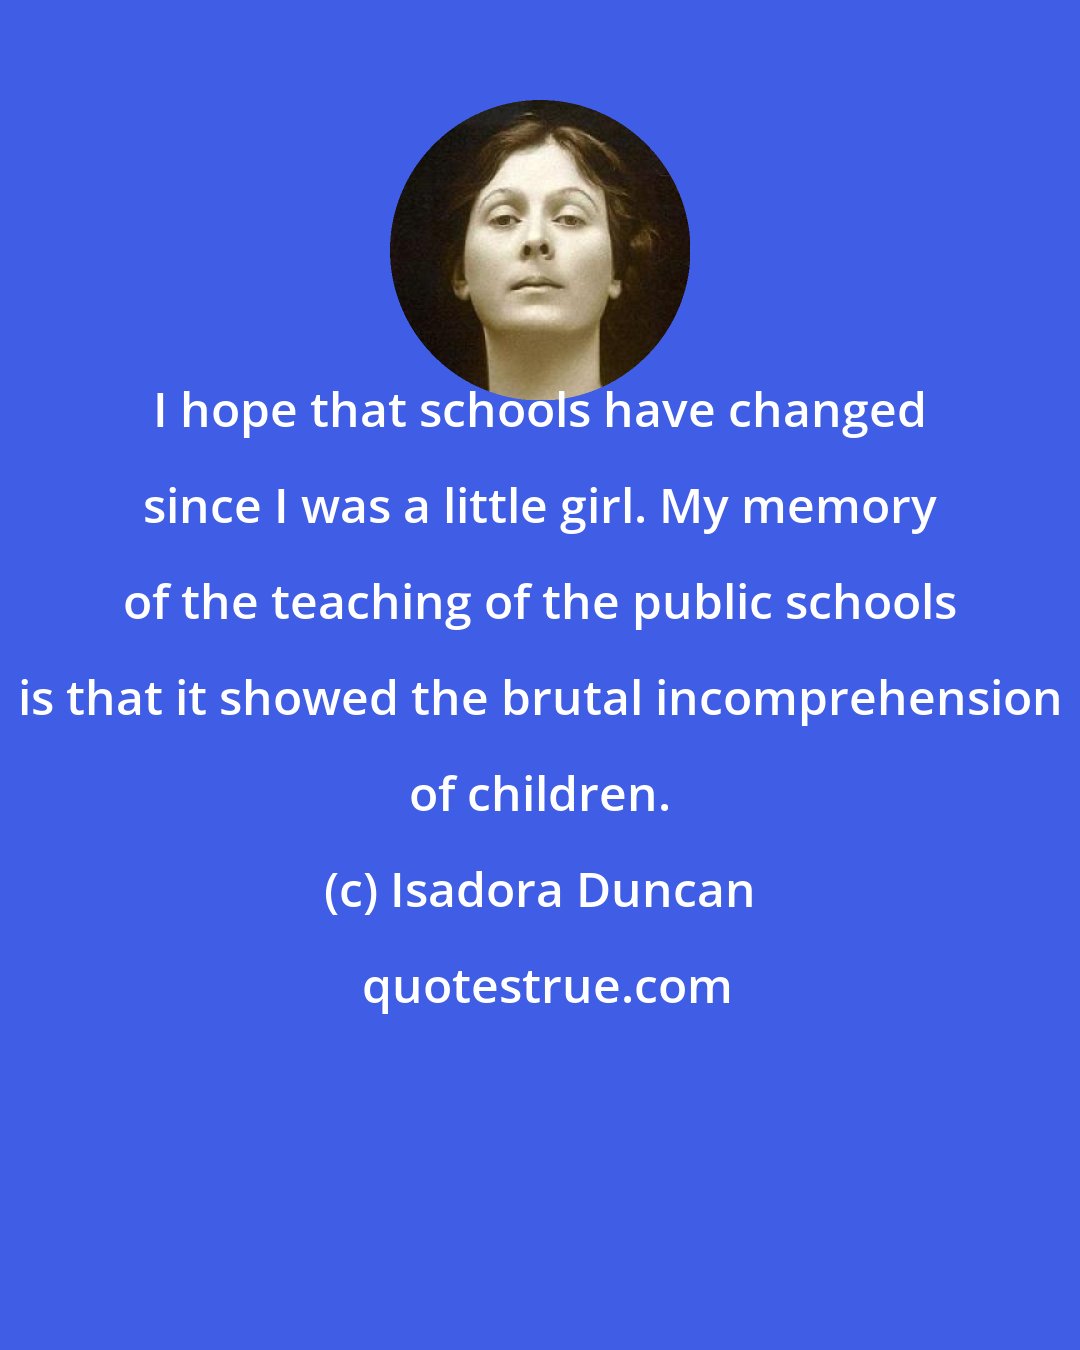 Isadora Duncan: I hope that schools have changed since I was a little girl. My memory of the teaching of the public schools is that it showed the brutal incomprehension of children.